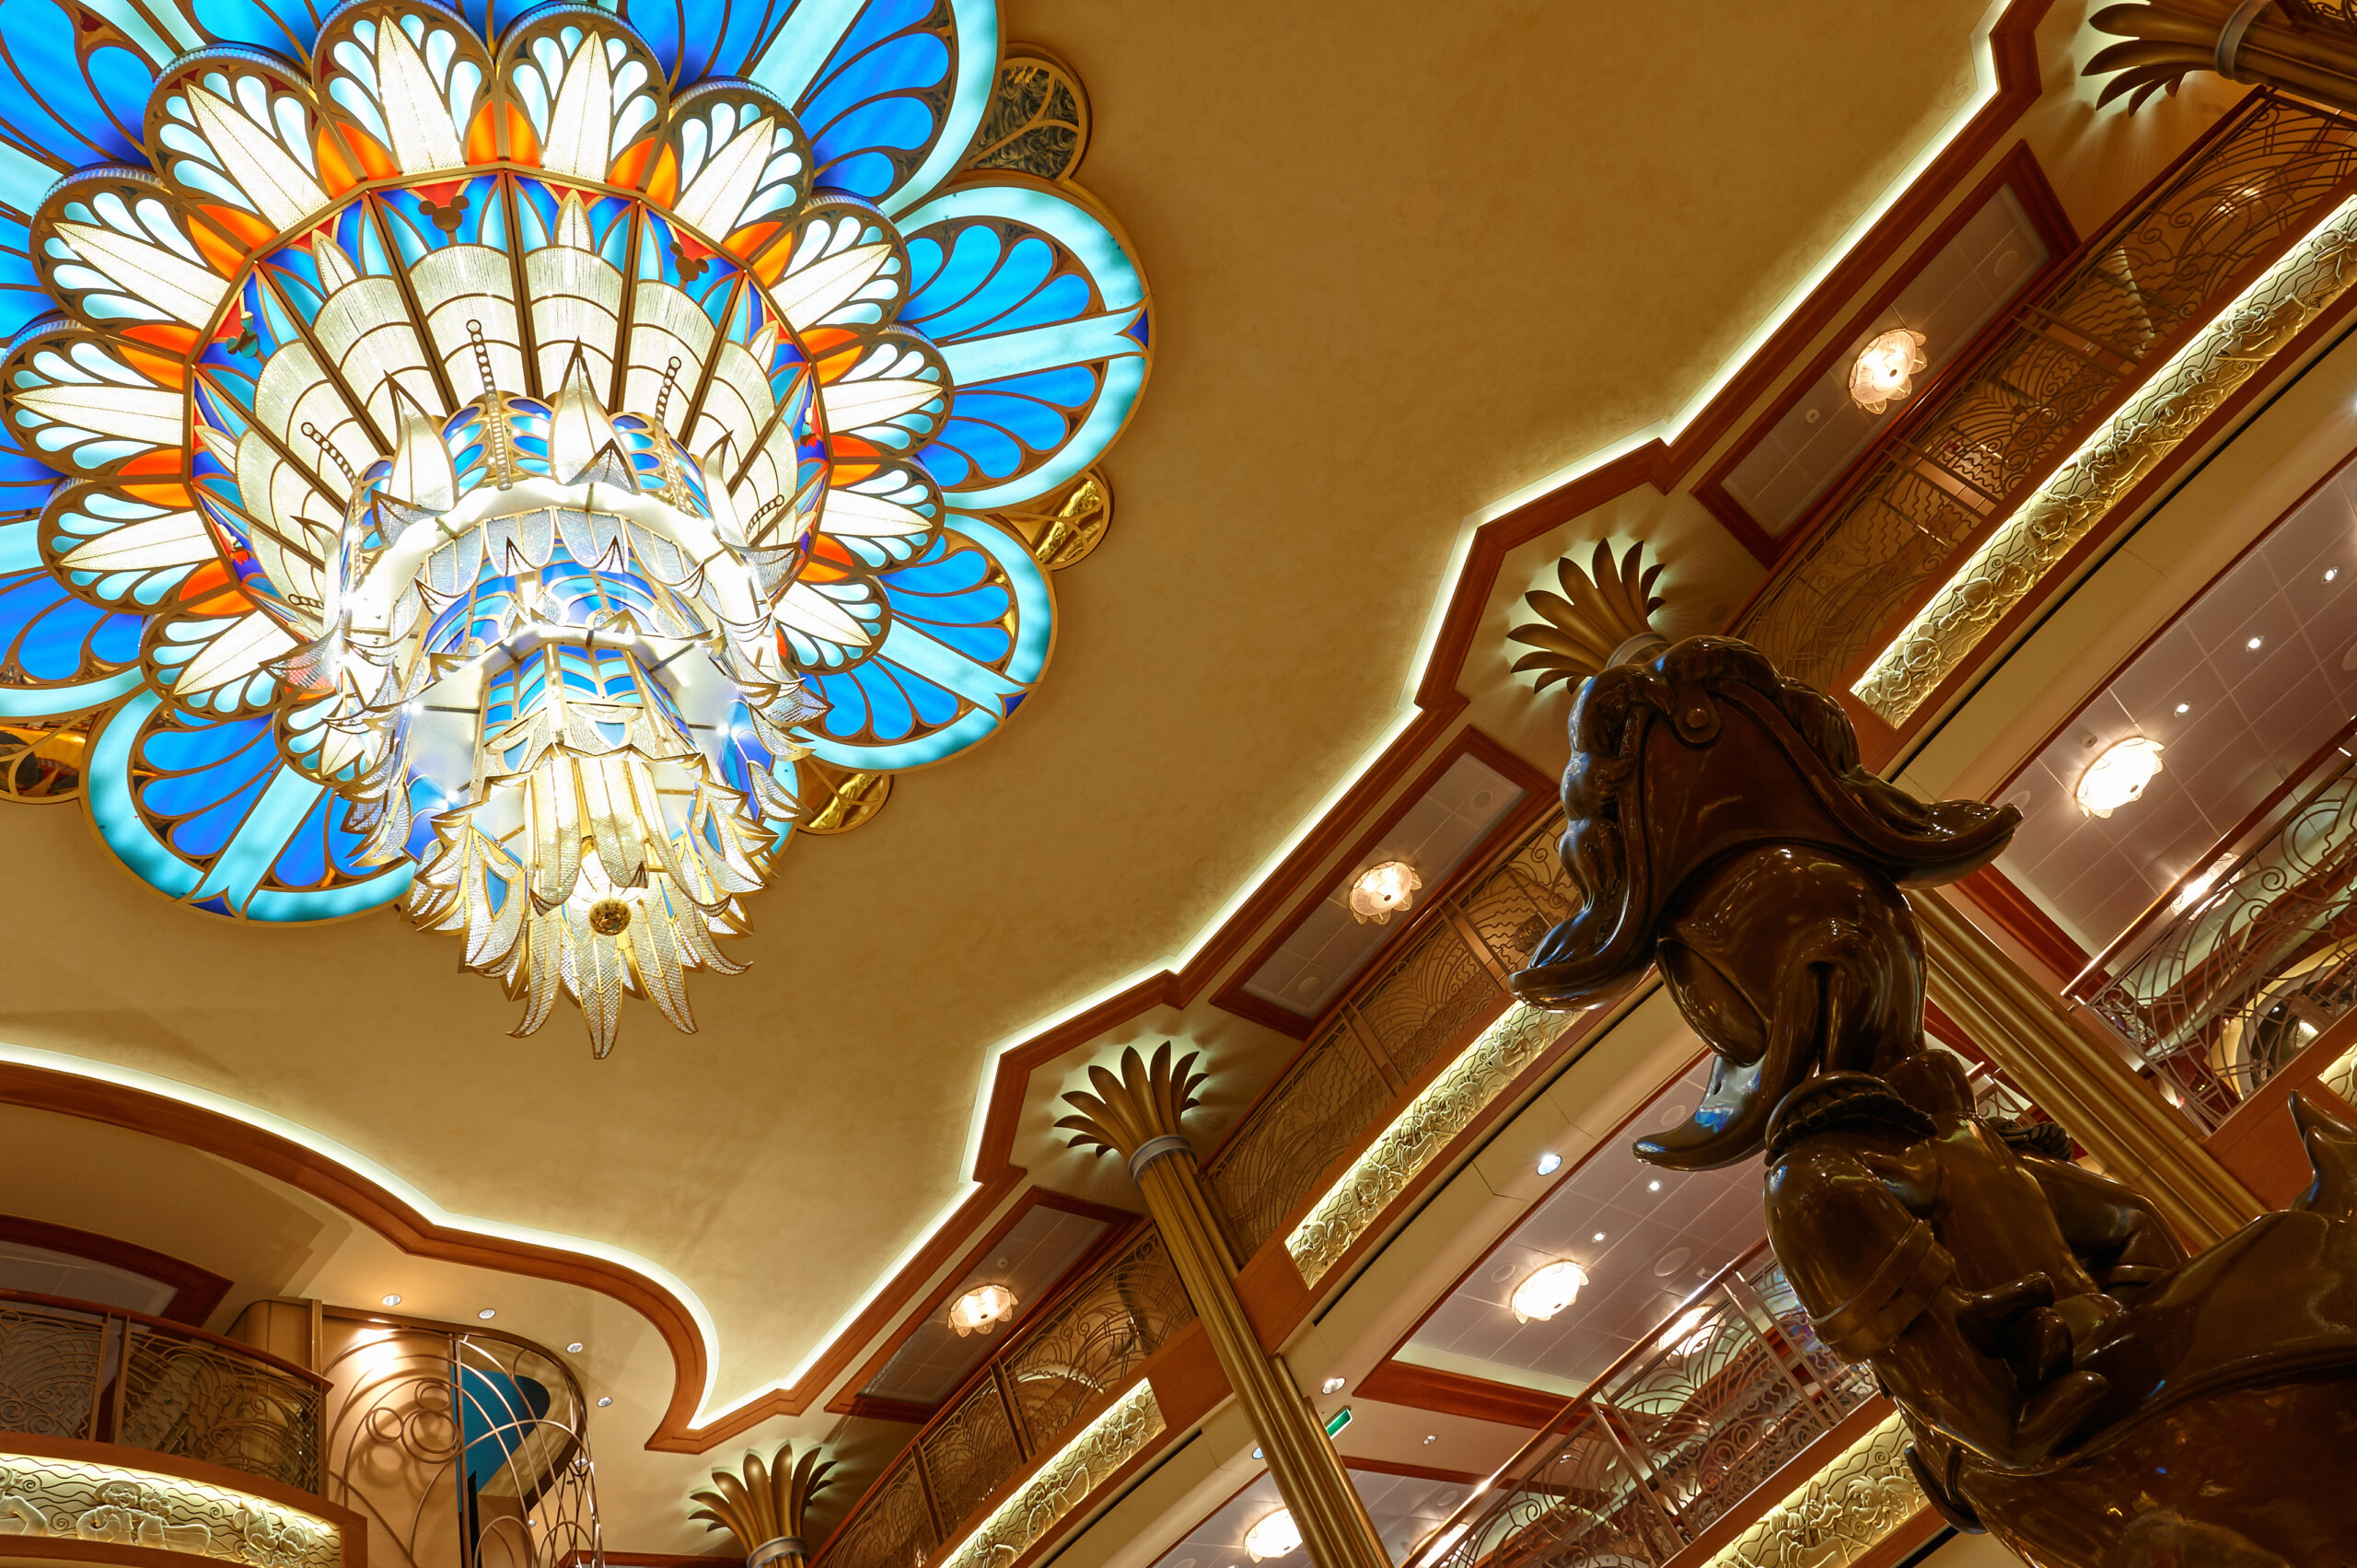 How to Have the Most Romantic Disney Cruise Without Kids